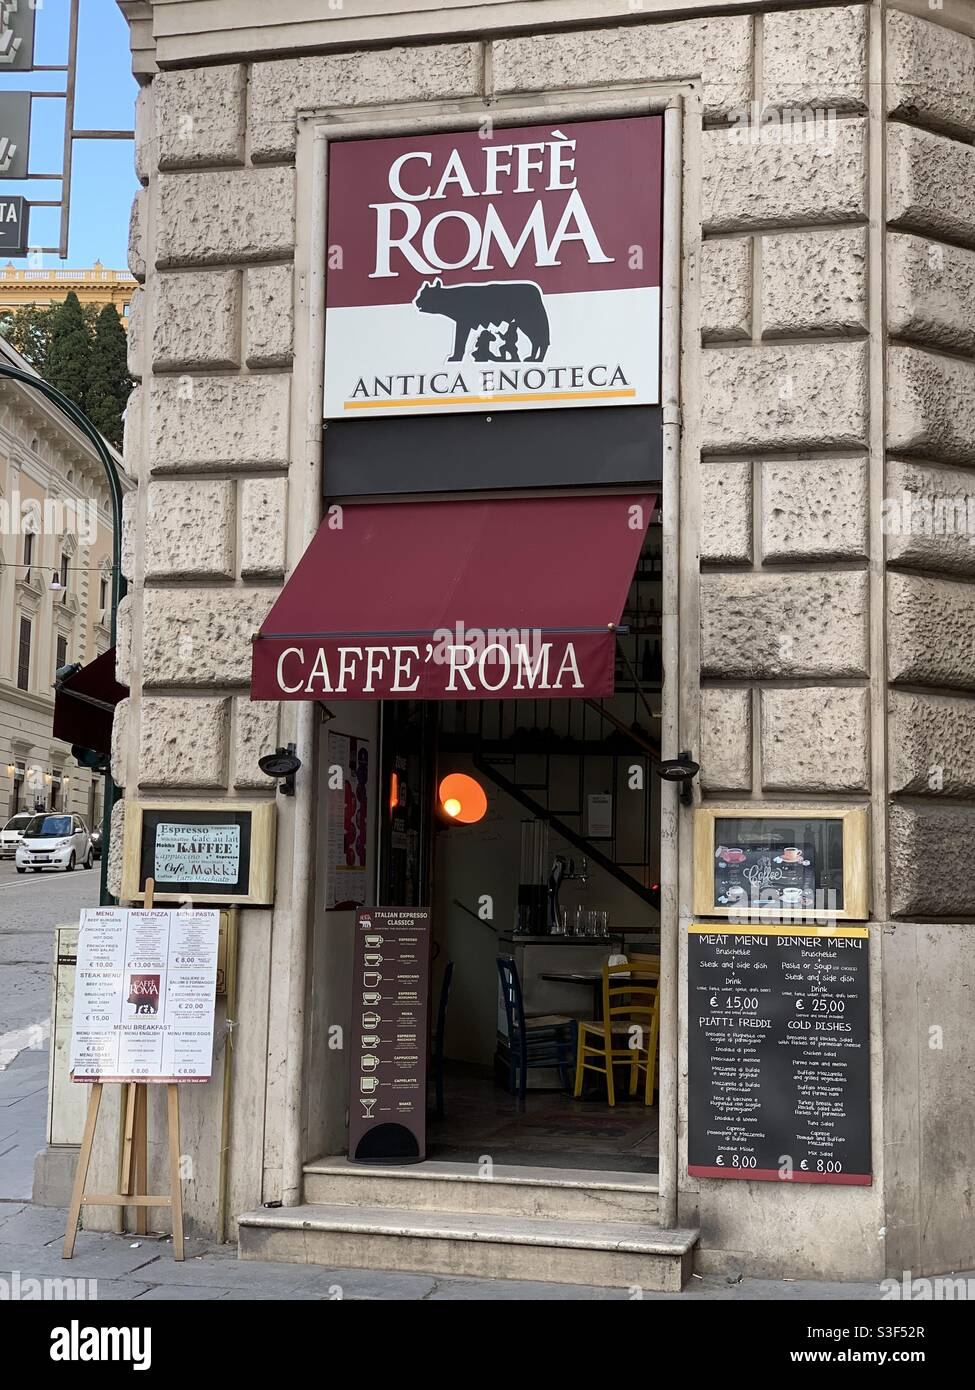 Cafe in Rome, Italy, located between Trevi fountain and the Roman Forum. Stock Photo